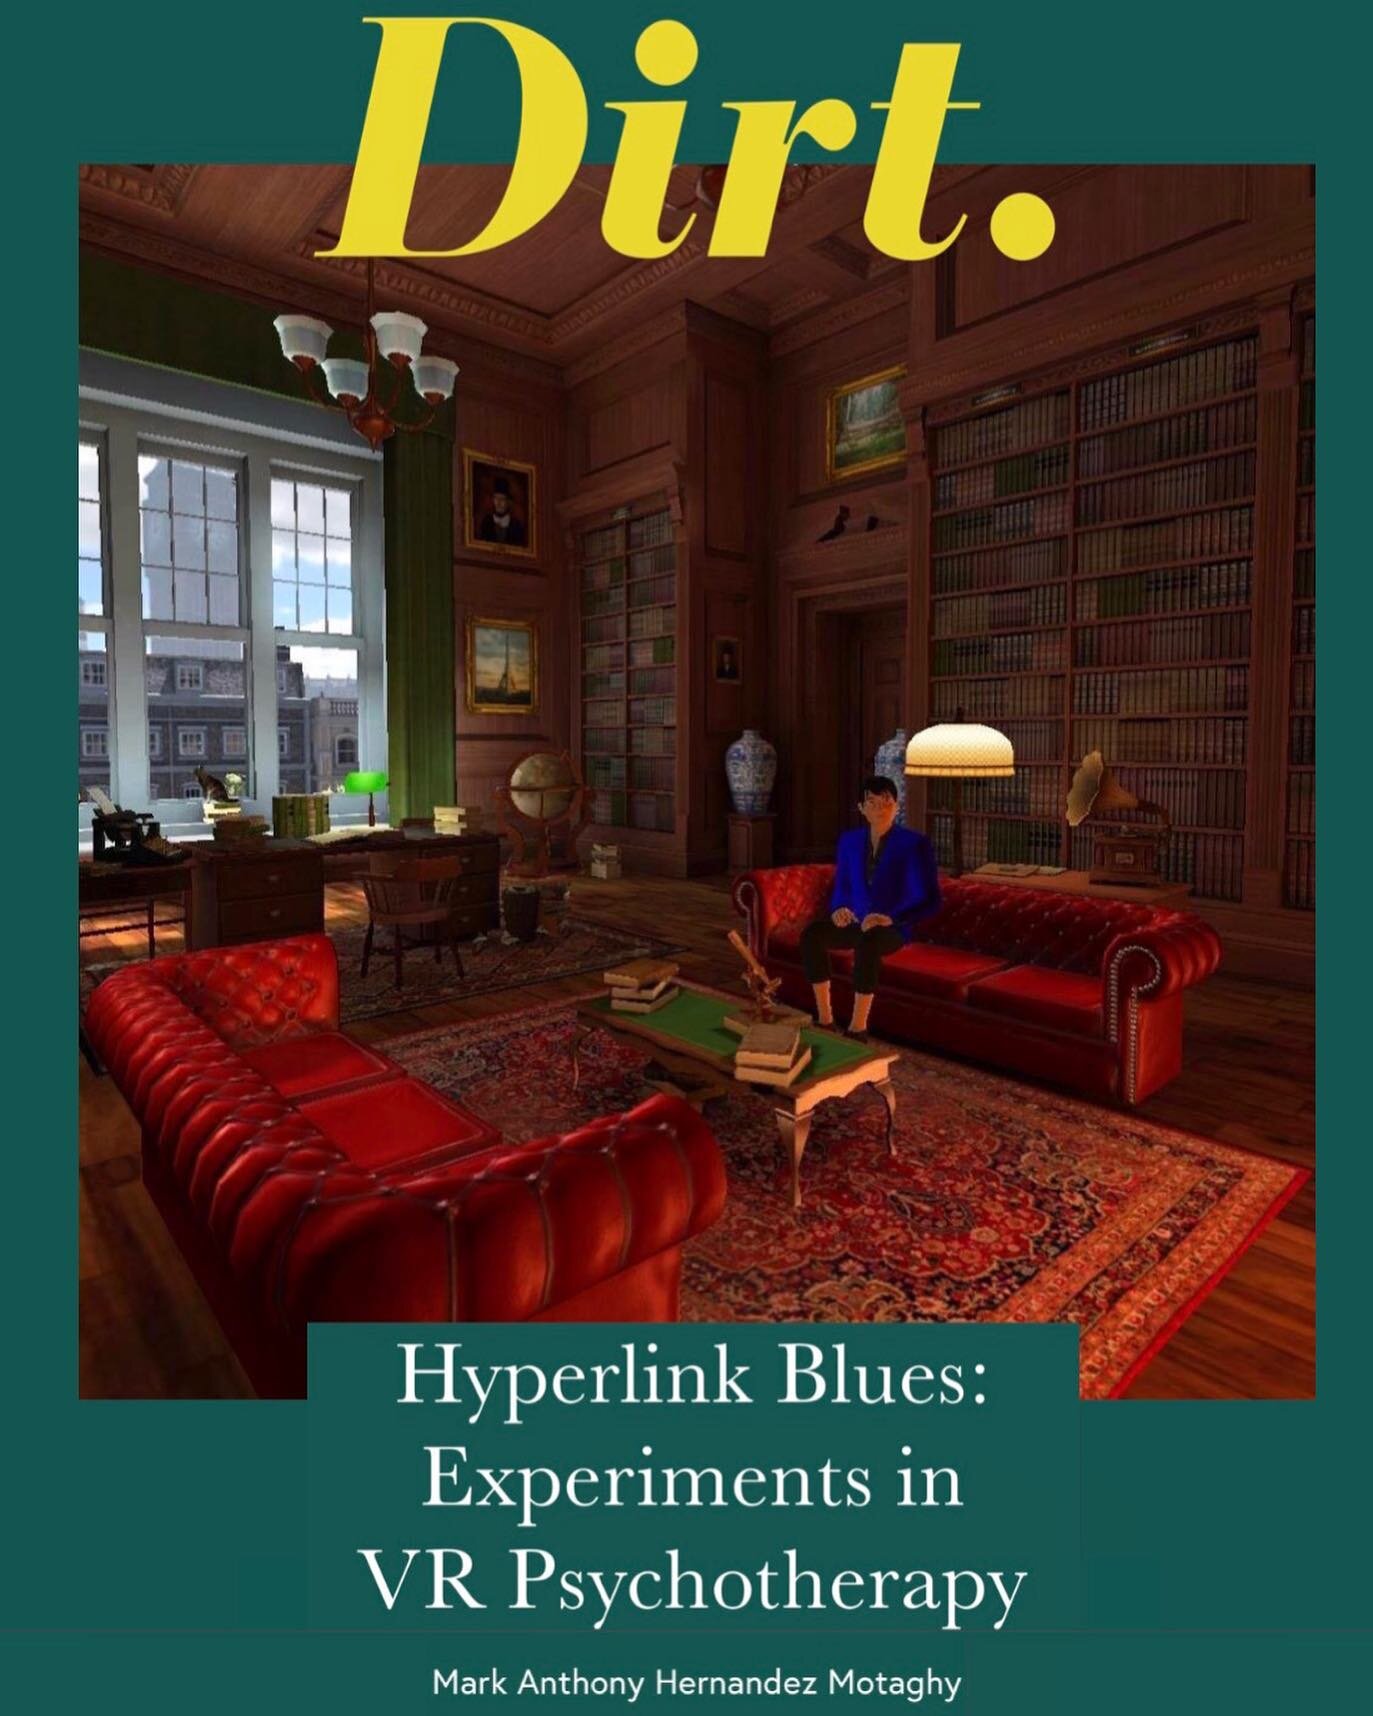 *Now Live!* &lsquo;Hyperlink Blues: Experiments in VR Psychotherapy' &mdash; Mark Anthony Hernandez Motaghy grants us an intimate reading of their experience of psychotherapy within a VR space. The sessions began IRL before COVID-19 necessitated the 